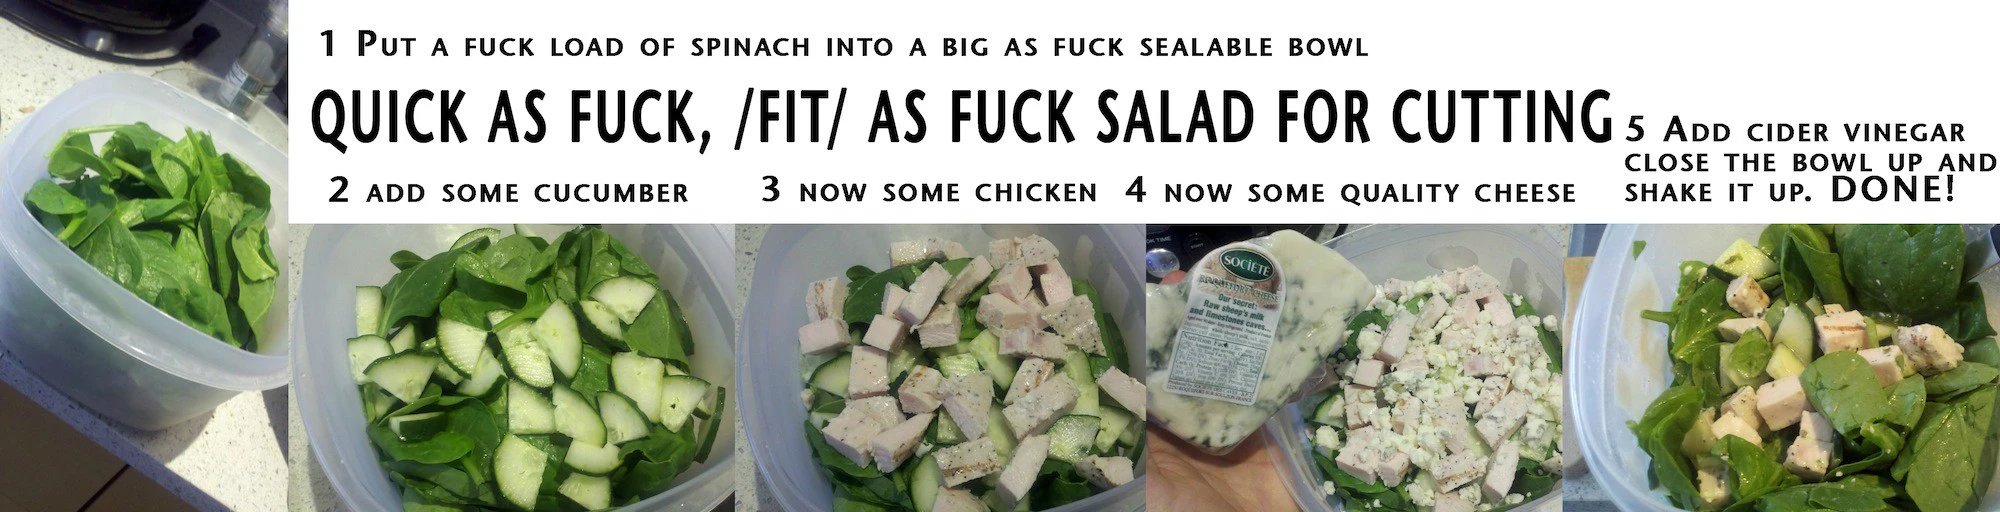 Fit As Fuck Salad